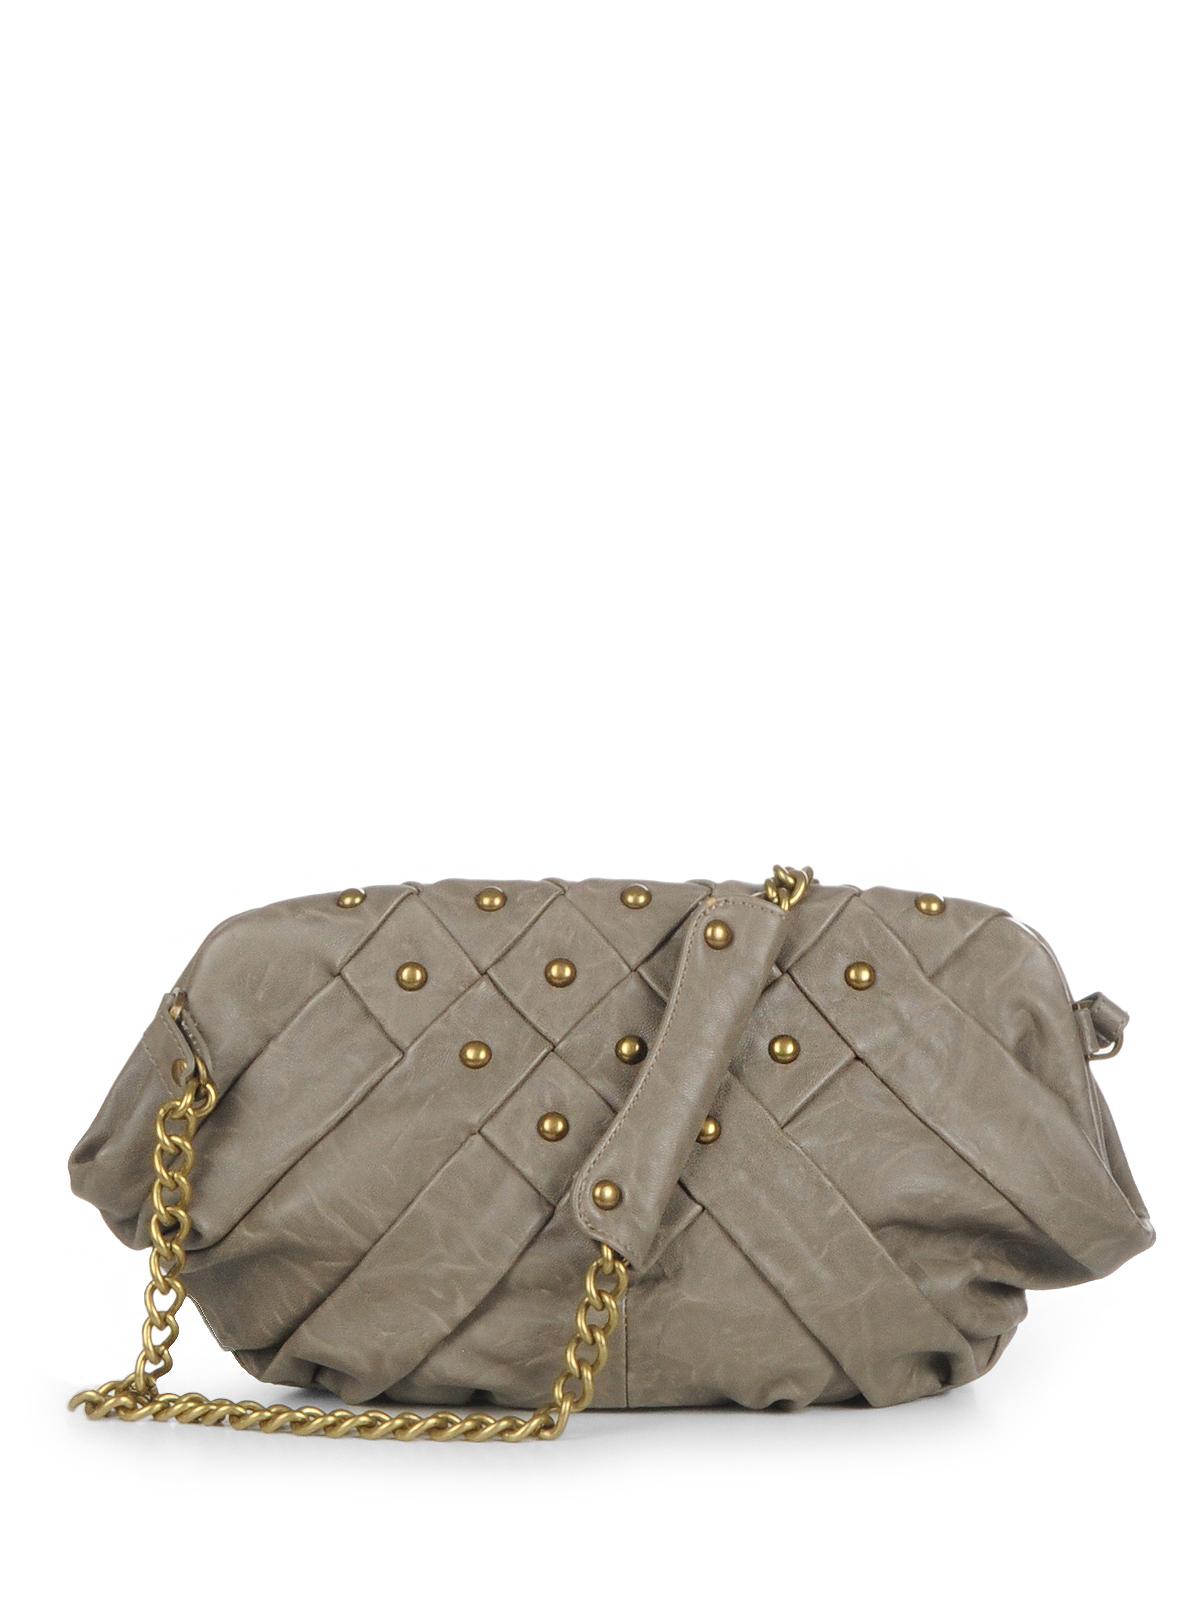 Foto Pepe Jeans Bolso gris ONE SIZE